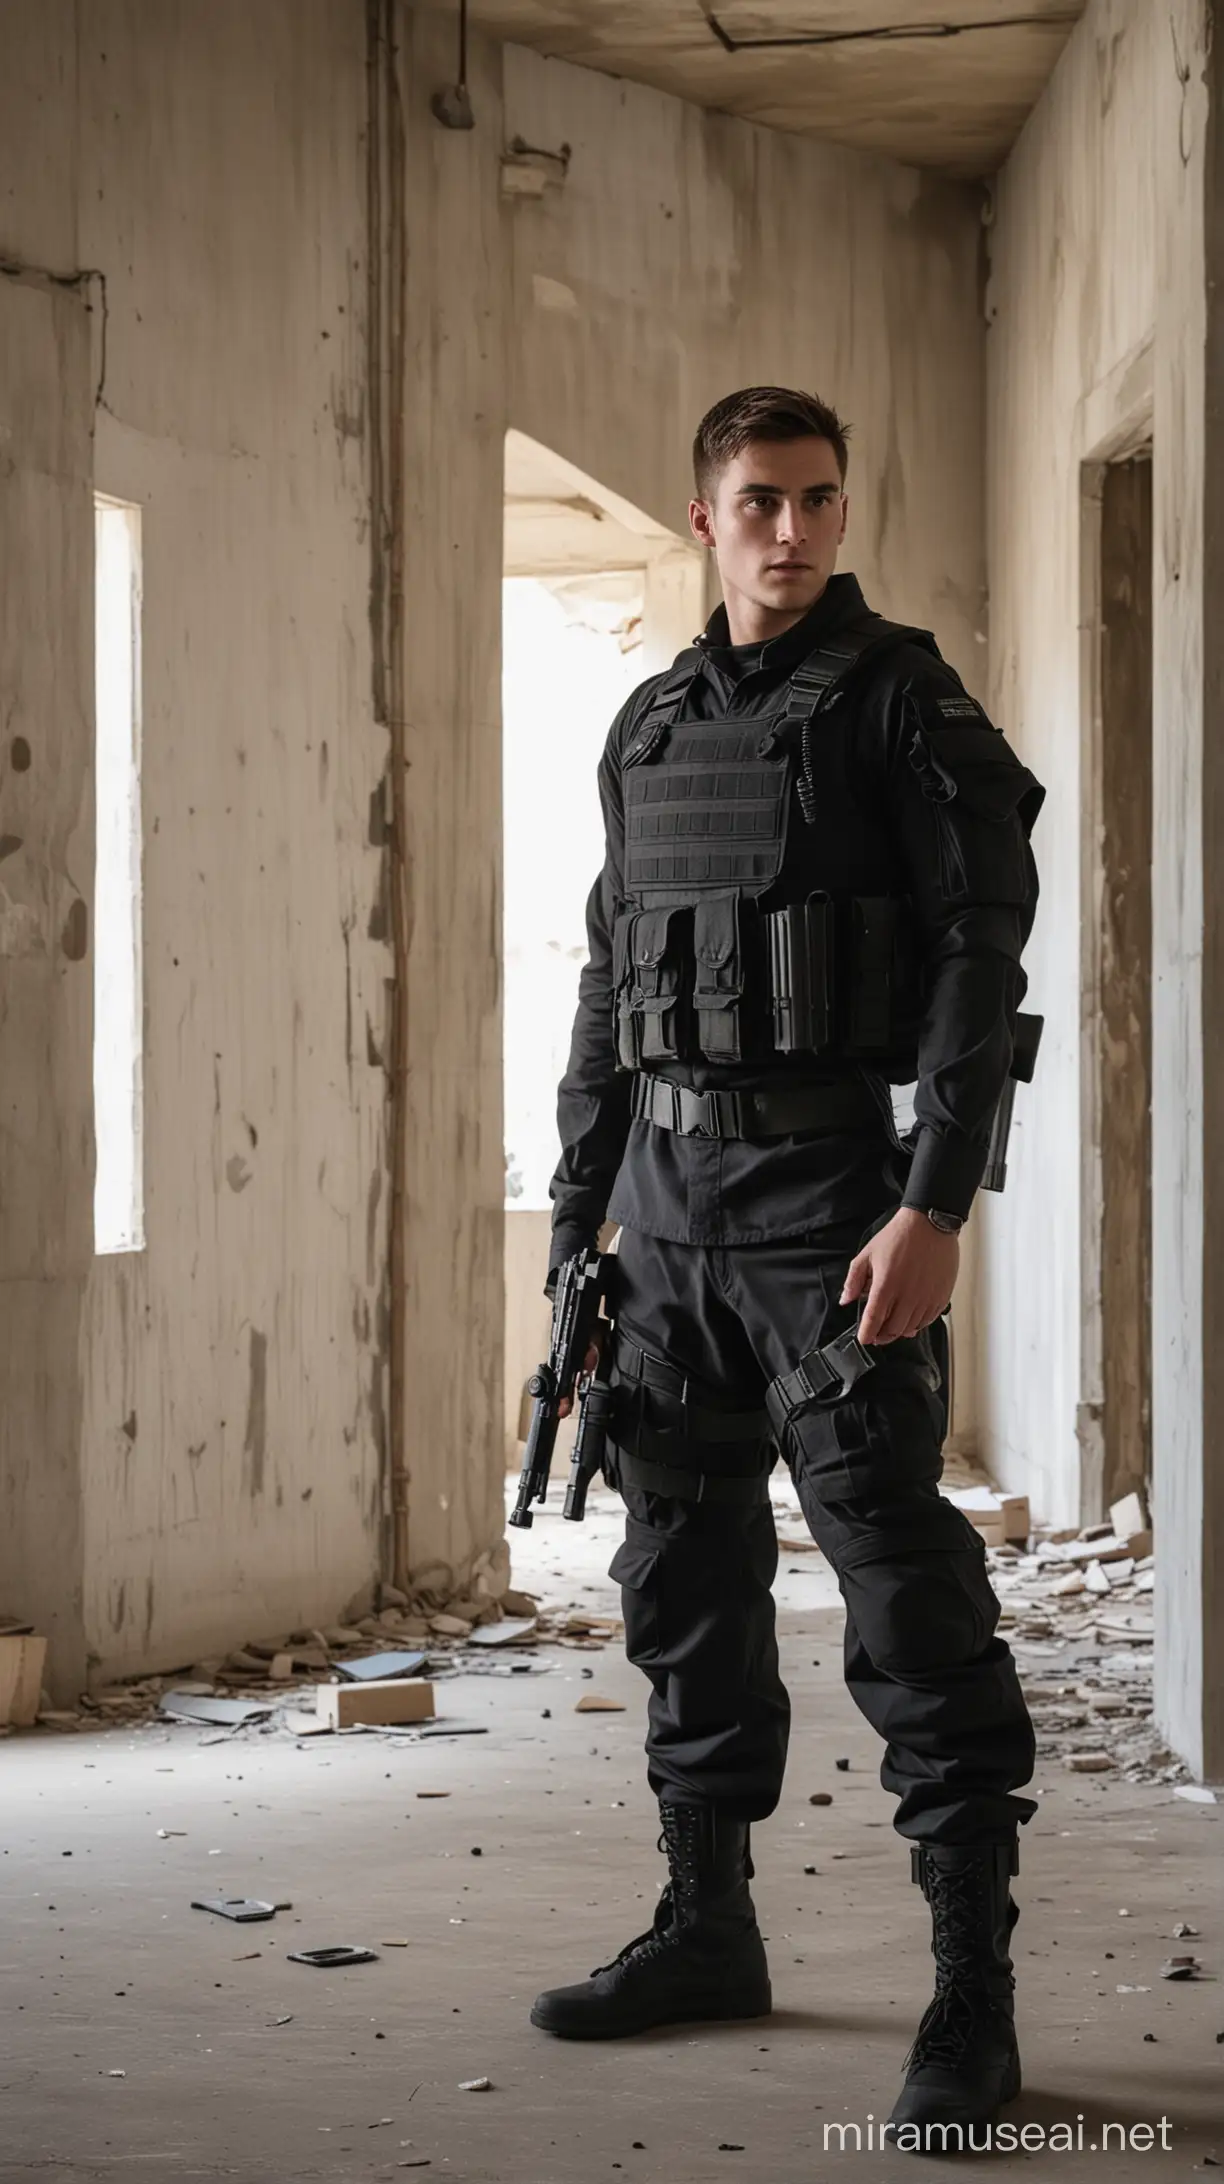 Young Soldier in Tactical Gear Stands Alone in Abandoned Structure